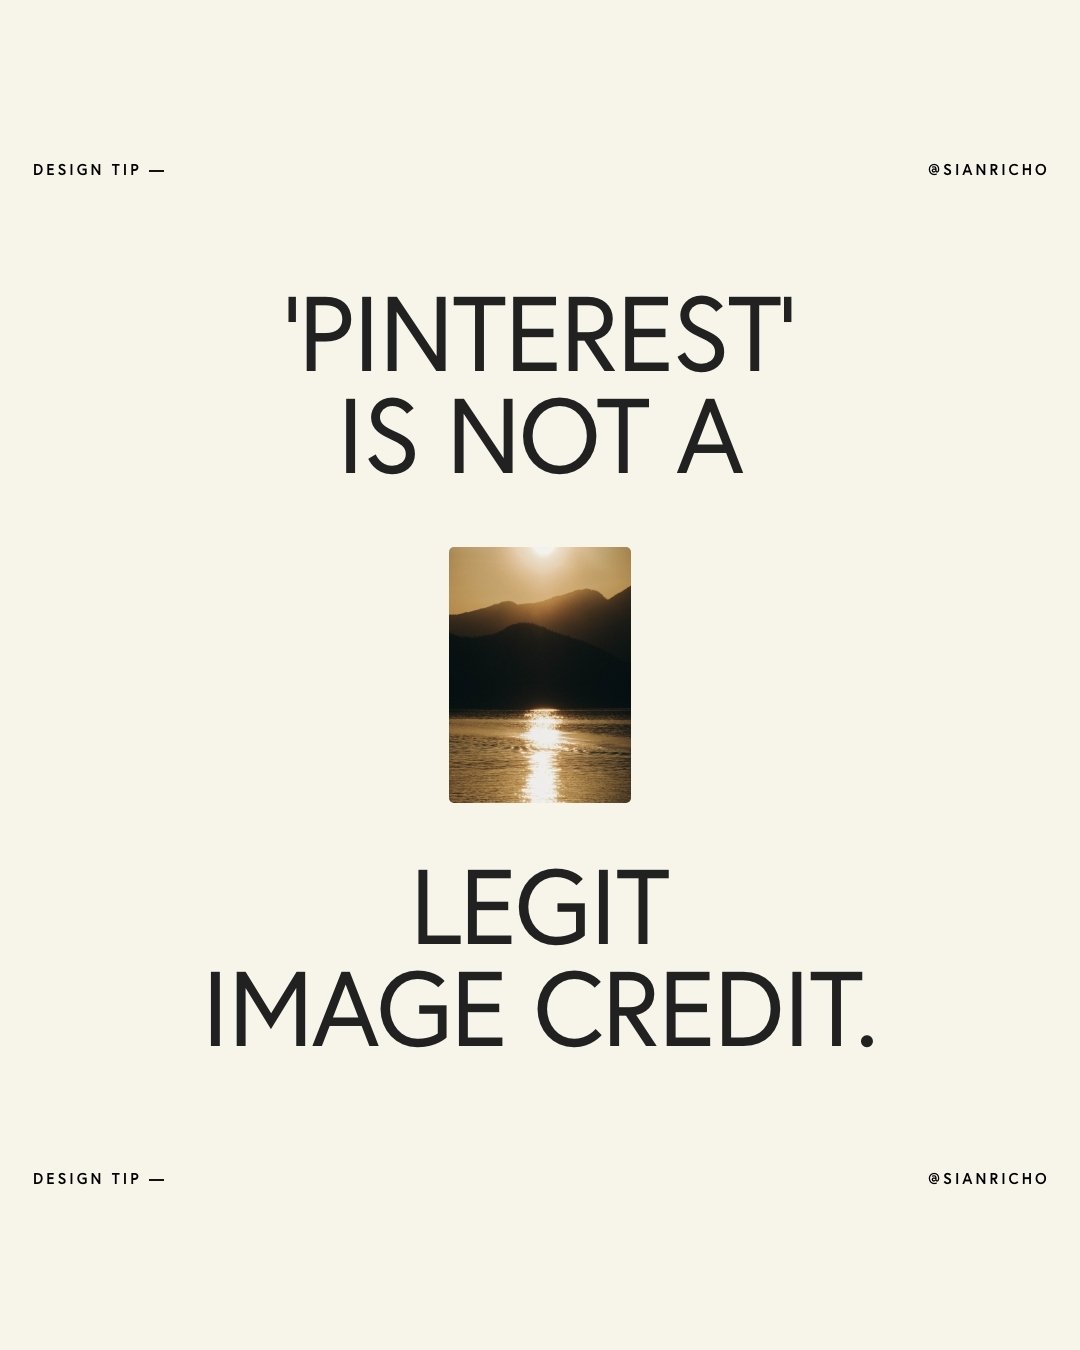 🙋&zwj;♀️ Designers, creatives, people of the internet, I'm calling you out. Crediting images or inspiration to 'Pinterest' is not it. (And yes, I've made mistakes here before too, but we can all do better).⠀⠀⠀⠀⠀⠀⠀⠀⁠⁠

WHY IT'S NOT COOL TO USE &lsquo